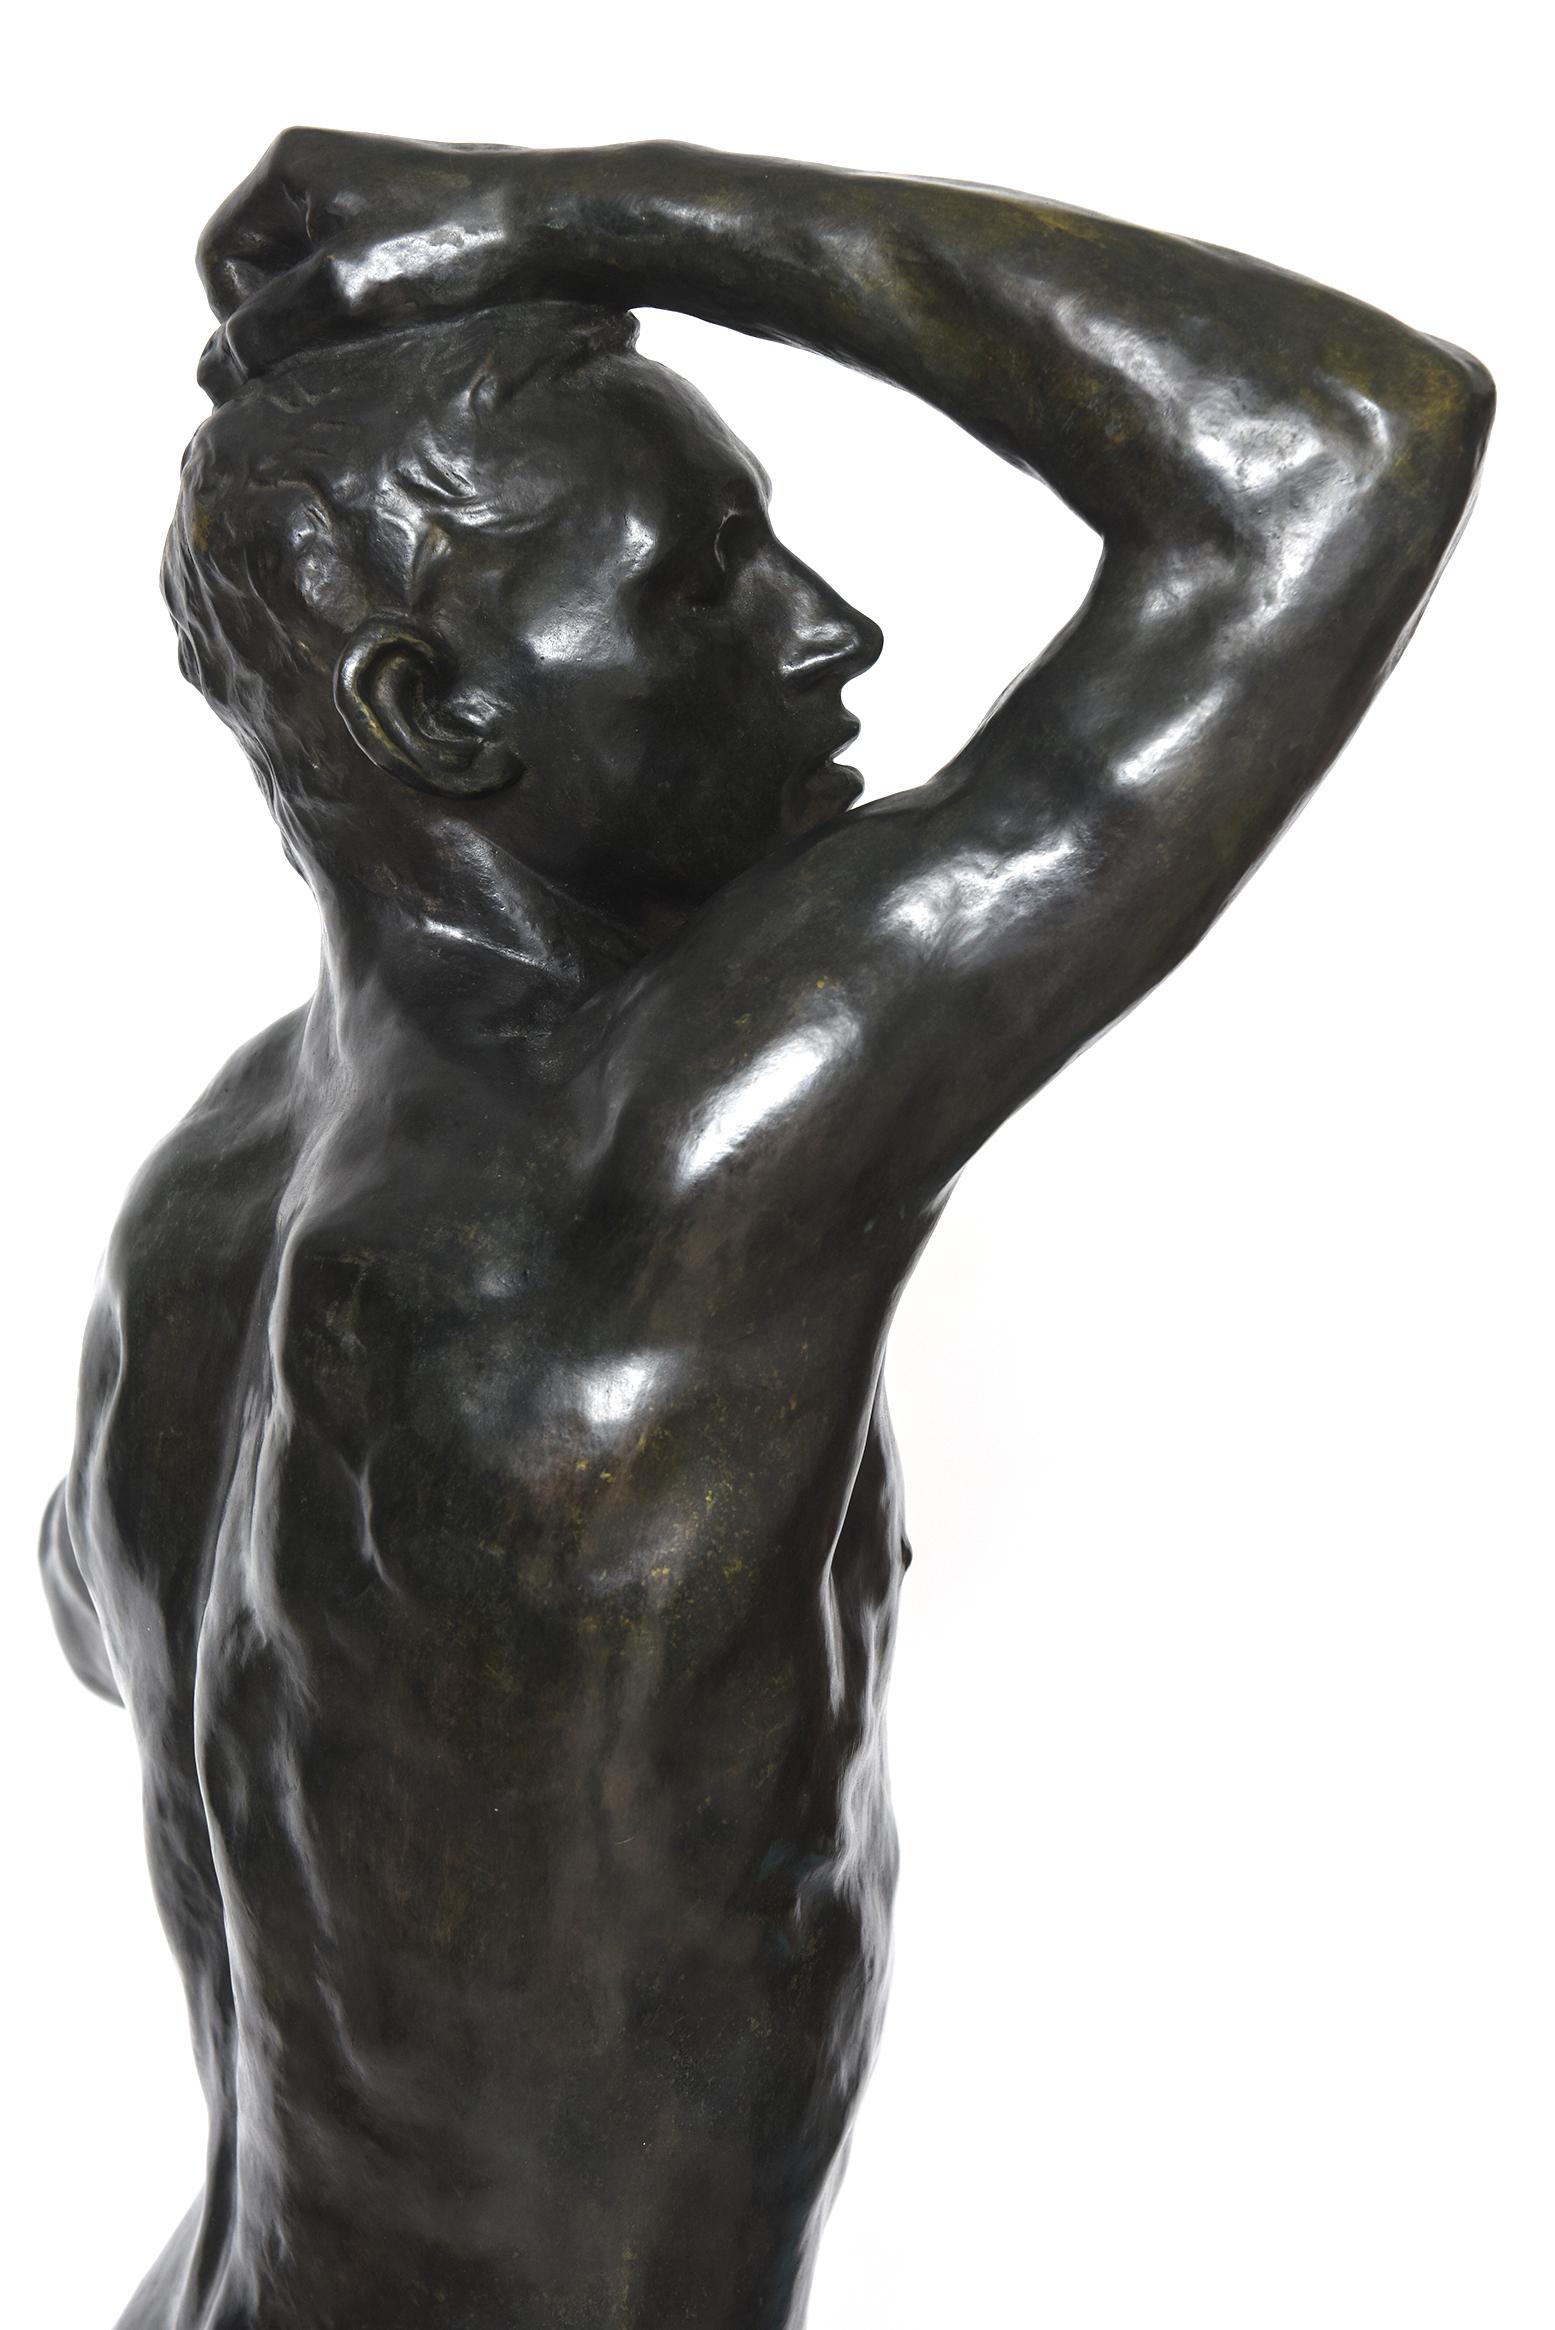 Late 20th Century After Auguste Rodin Bronze Sculpture of the Age of Bronze Male Nude Figure